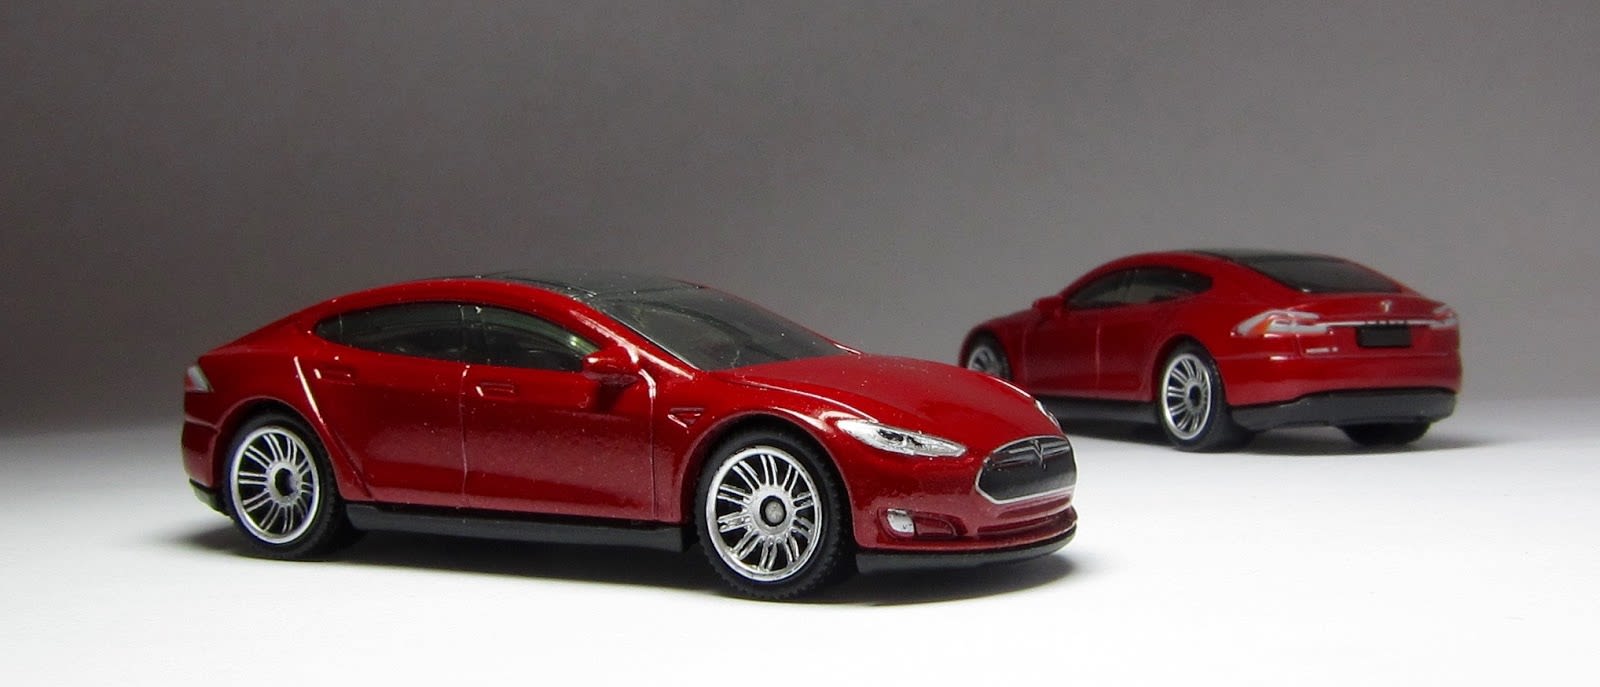 Illustration for article titled Man the MBX Tesla Model S casting is a stunner.